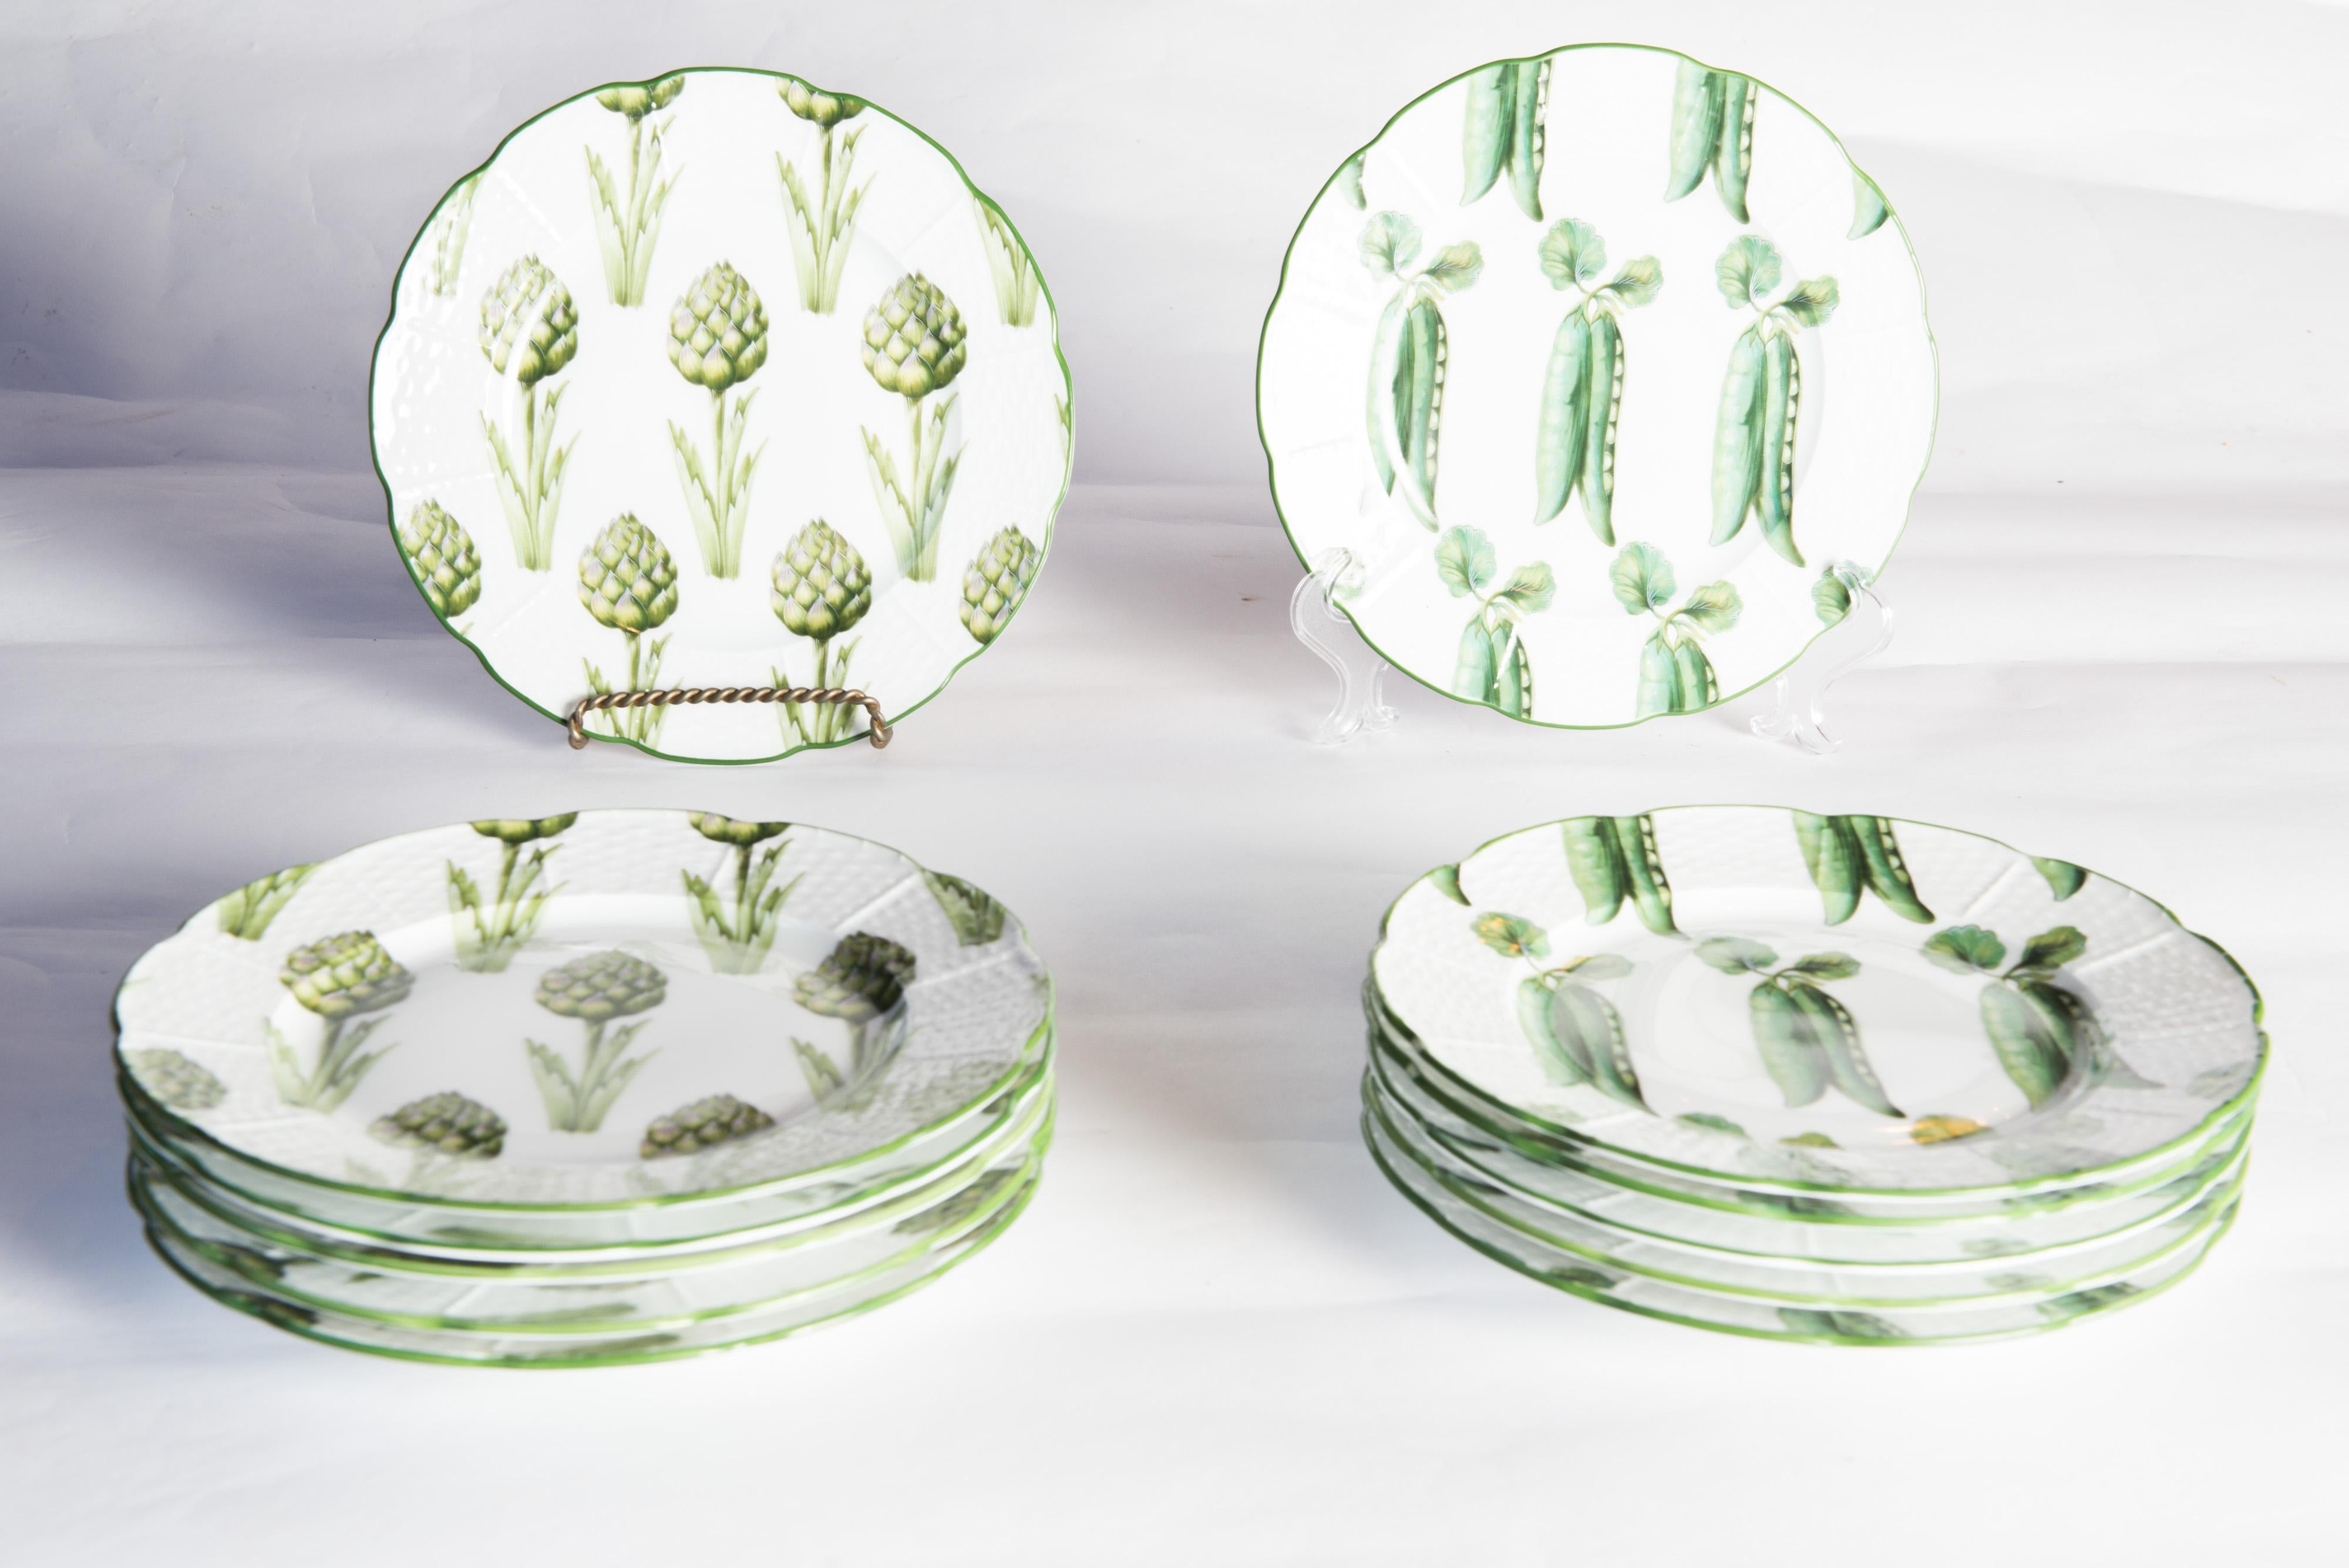 From the Mrs. Henry Ford II estate: A. Raynaud & Co. Limoges France. 